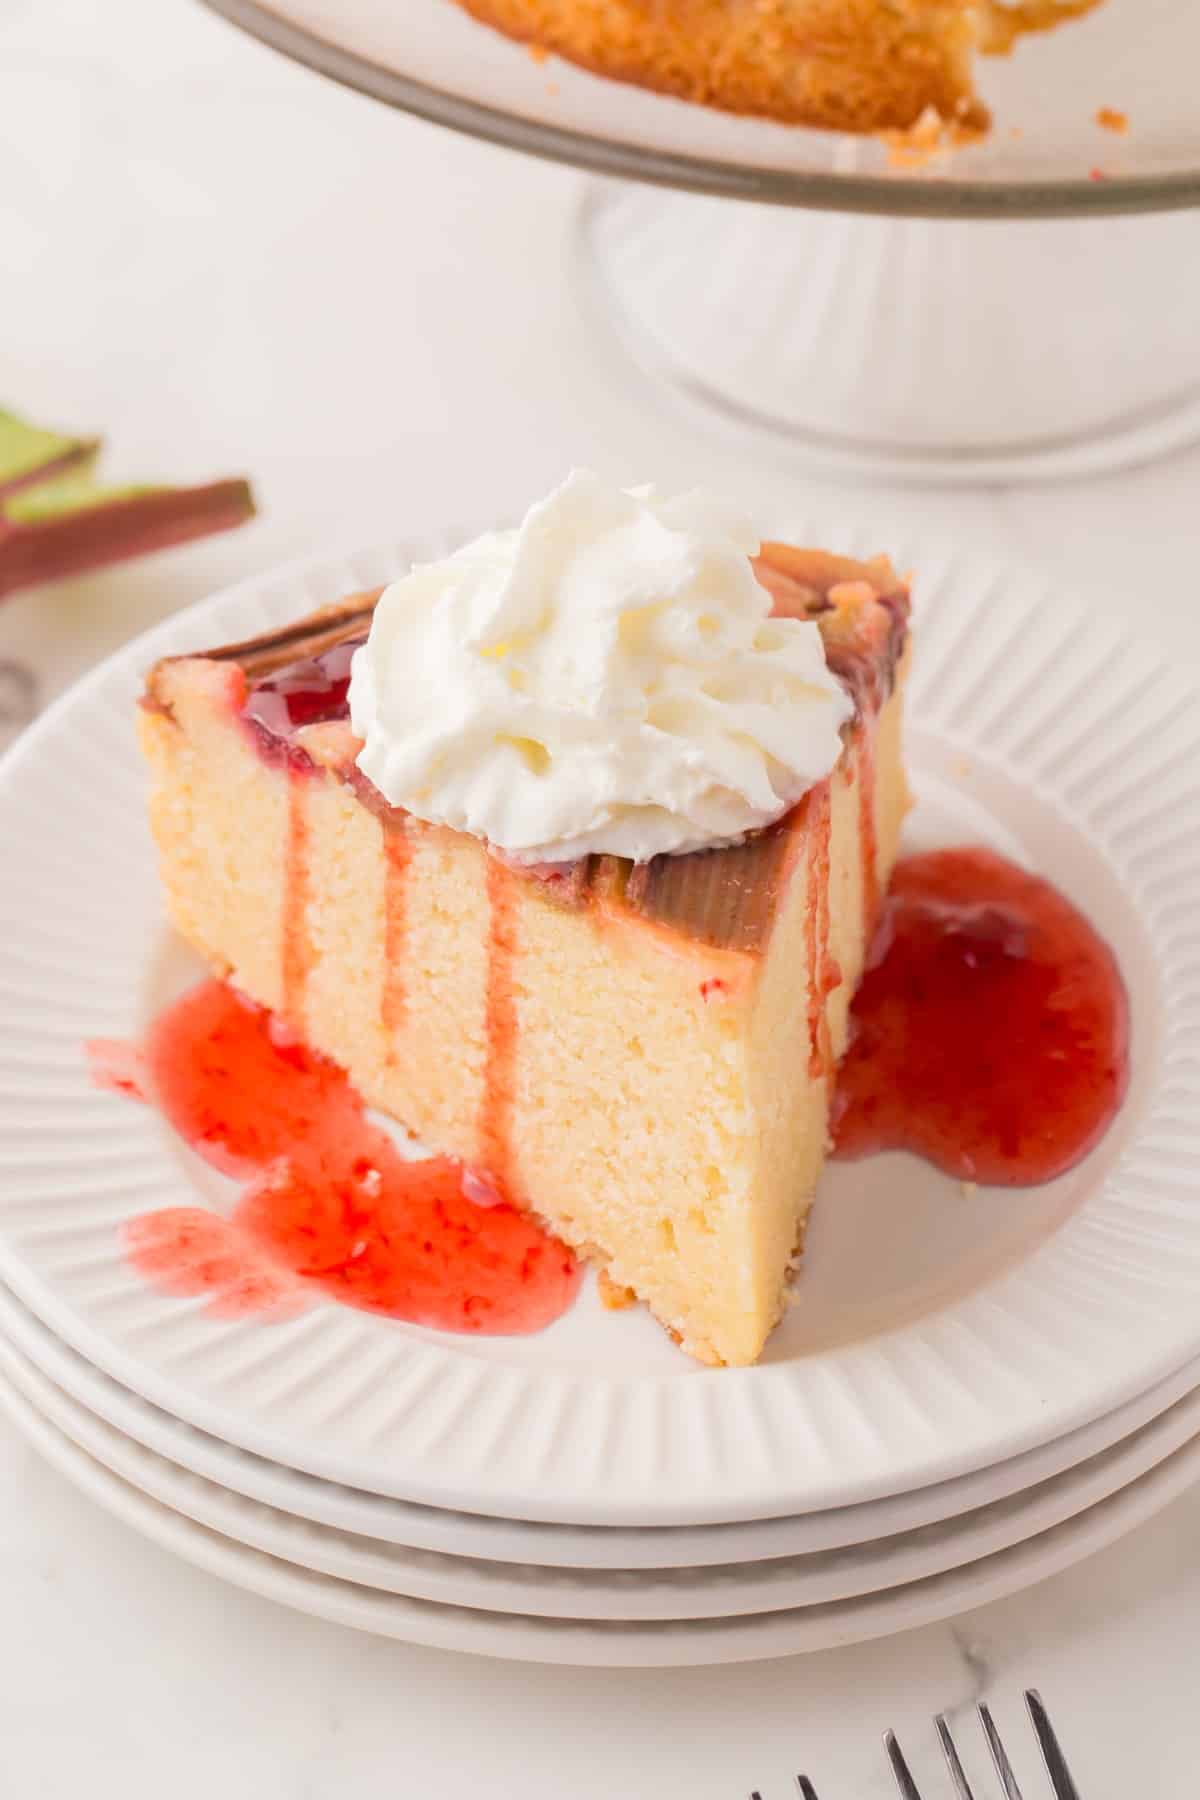 A slice of cake with jam over the top and whipped cream. 